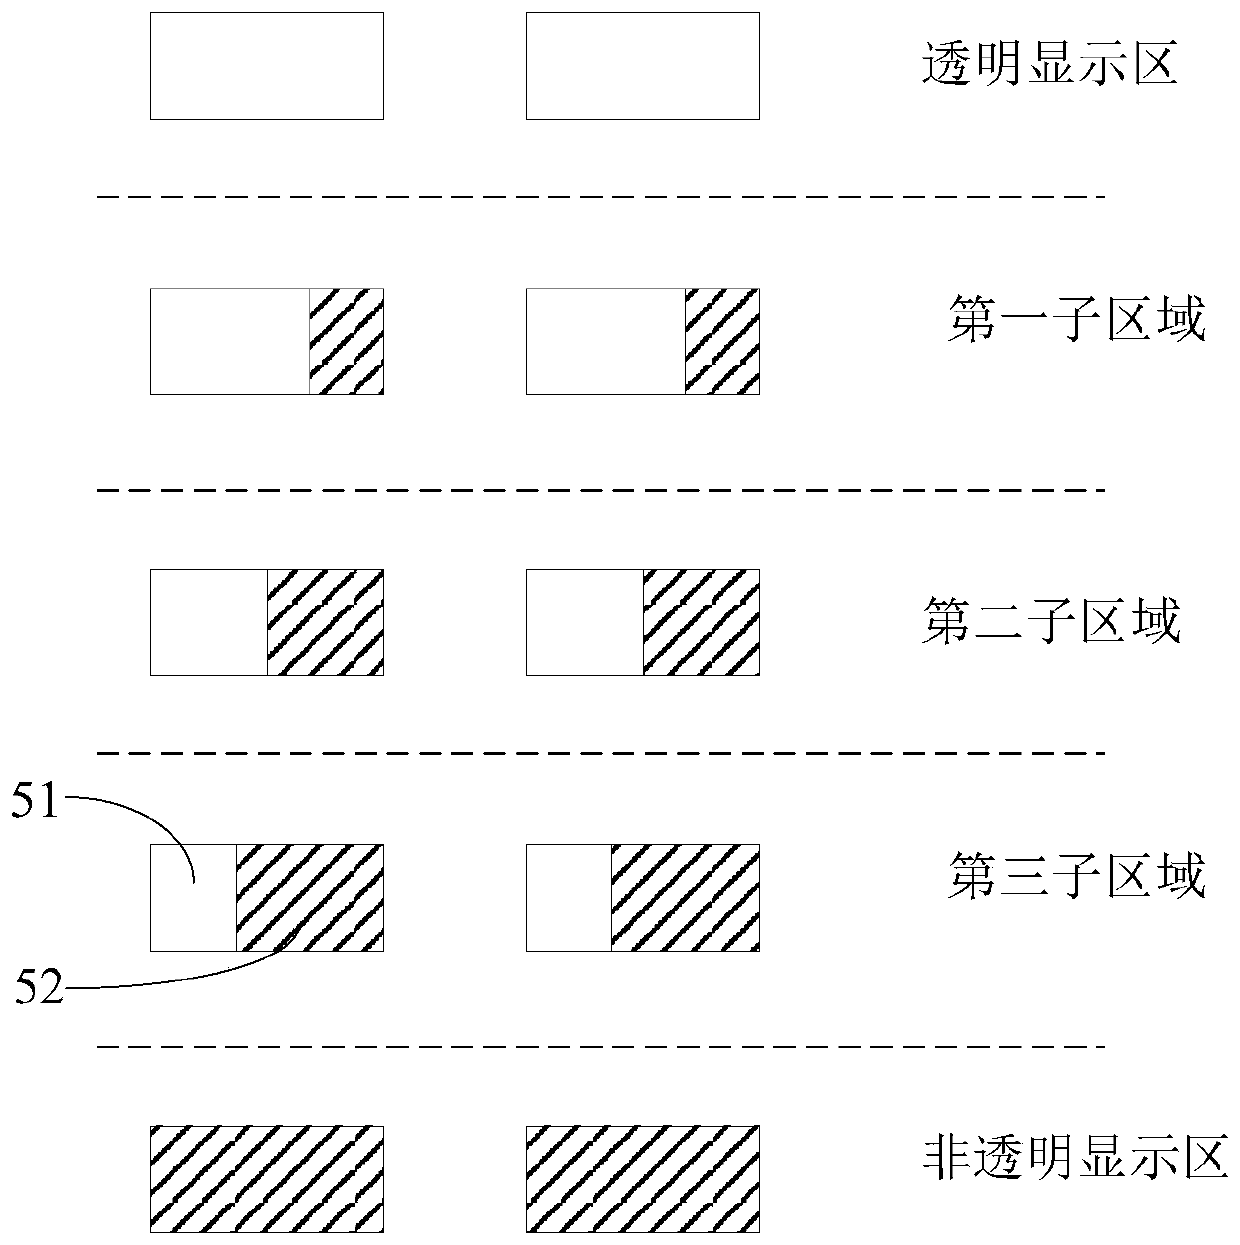 Display substrate, display panel, and display device